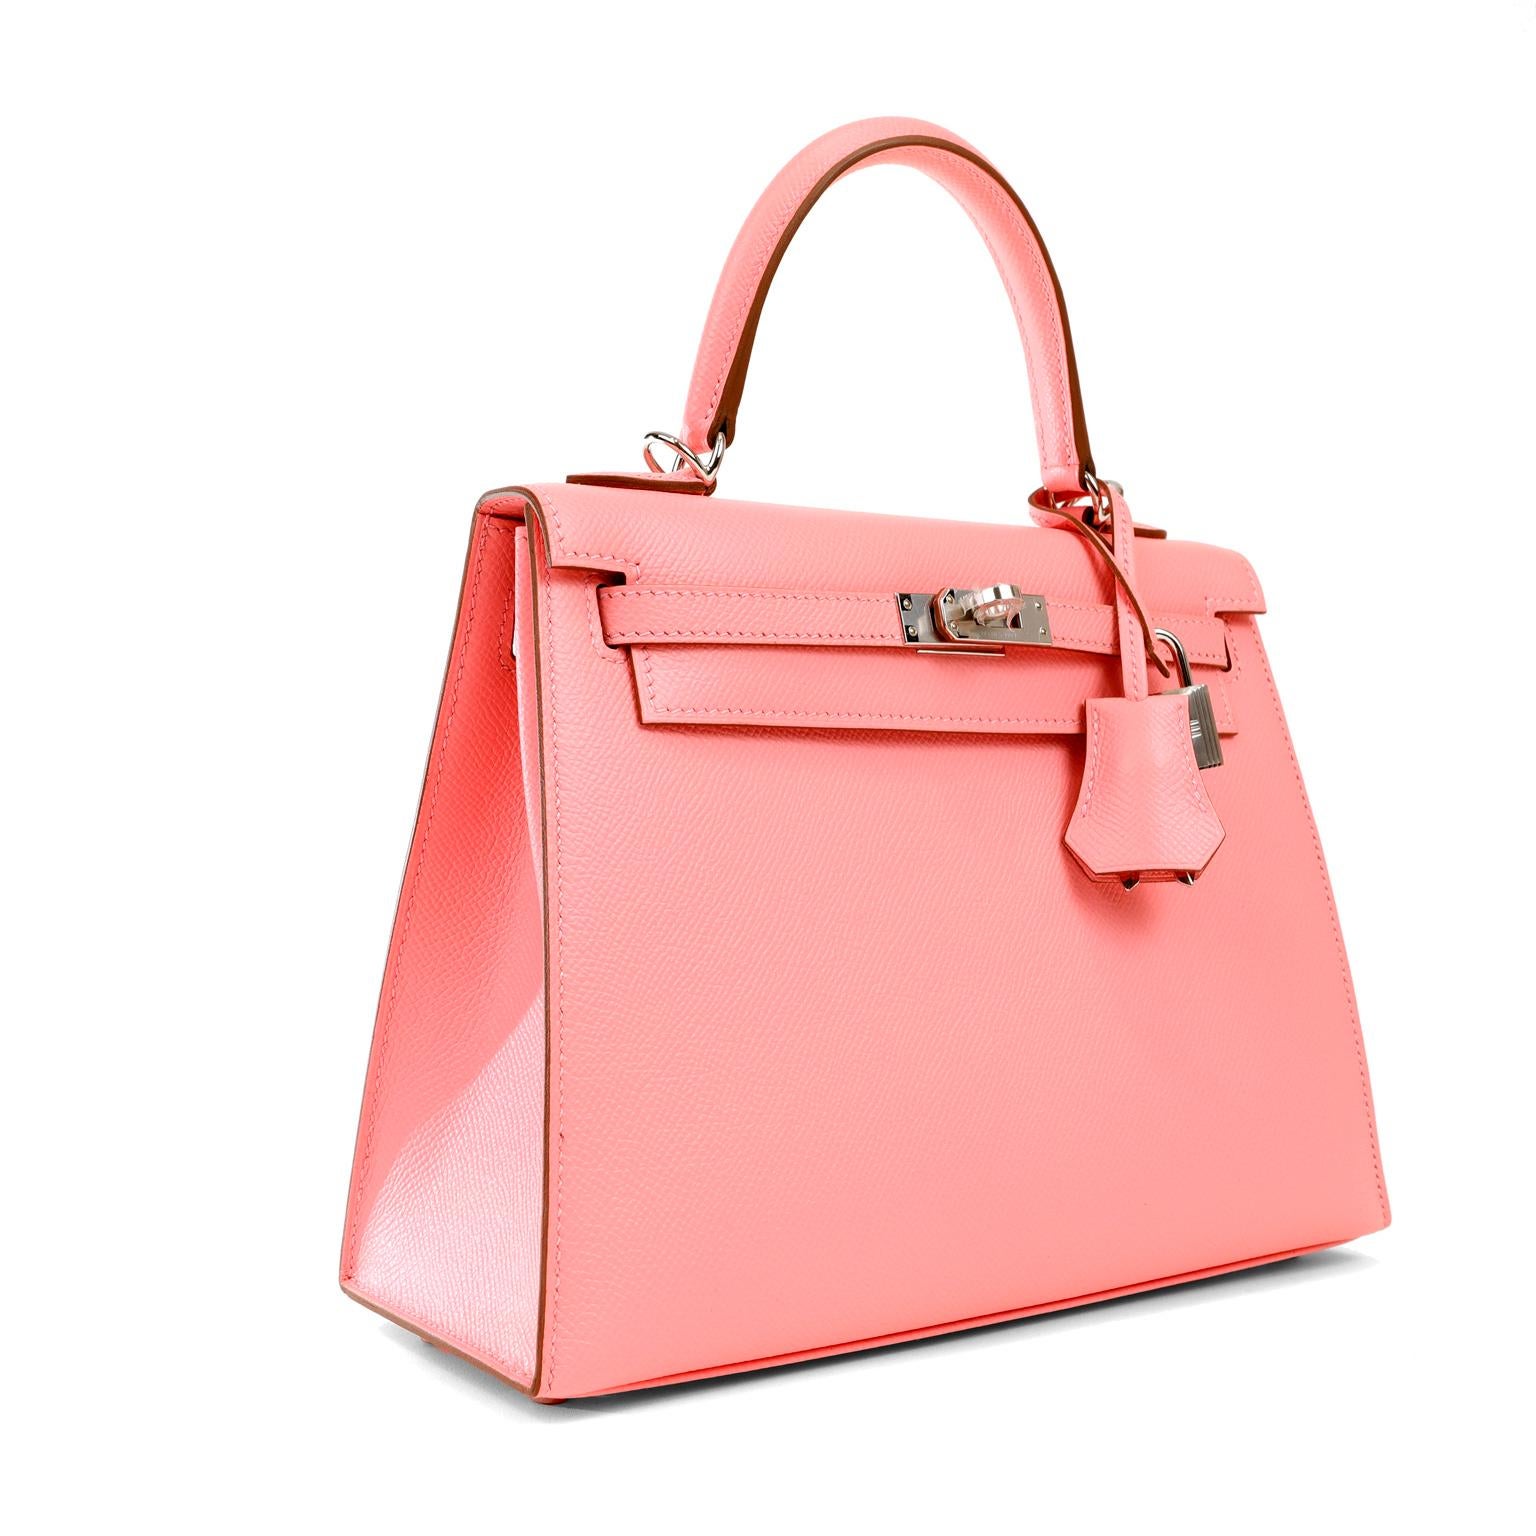 This authentic Hermès Pink Epsom 25 cm Kelly Sellier is in pristine condition with the protective plastic intact on the hardware.     Hermès bags are considered the ultimate luxury item worldwide.  Each piece is handcrafted with waitlists that can